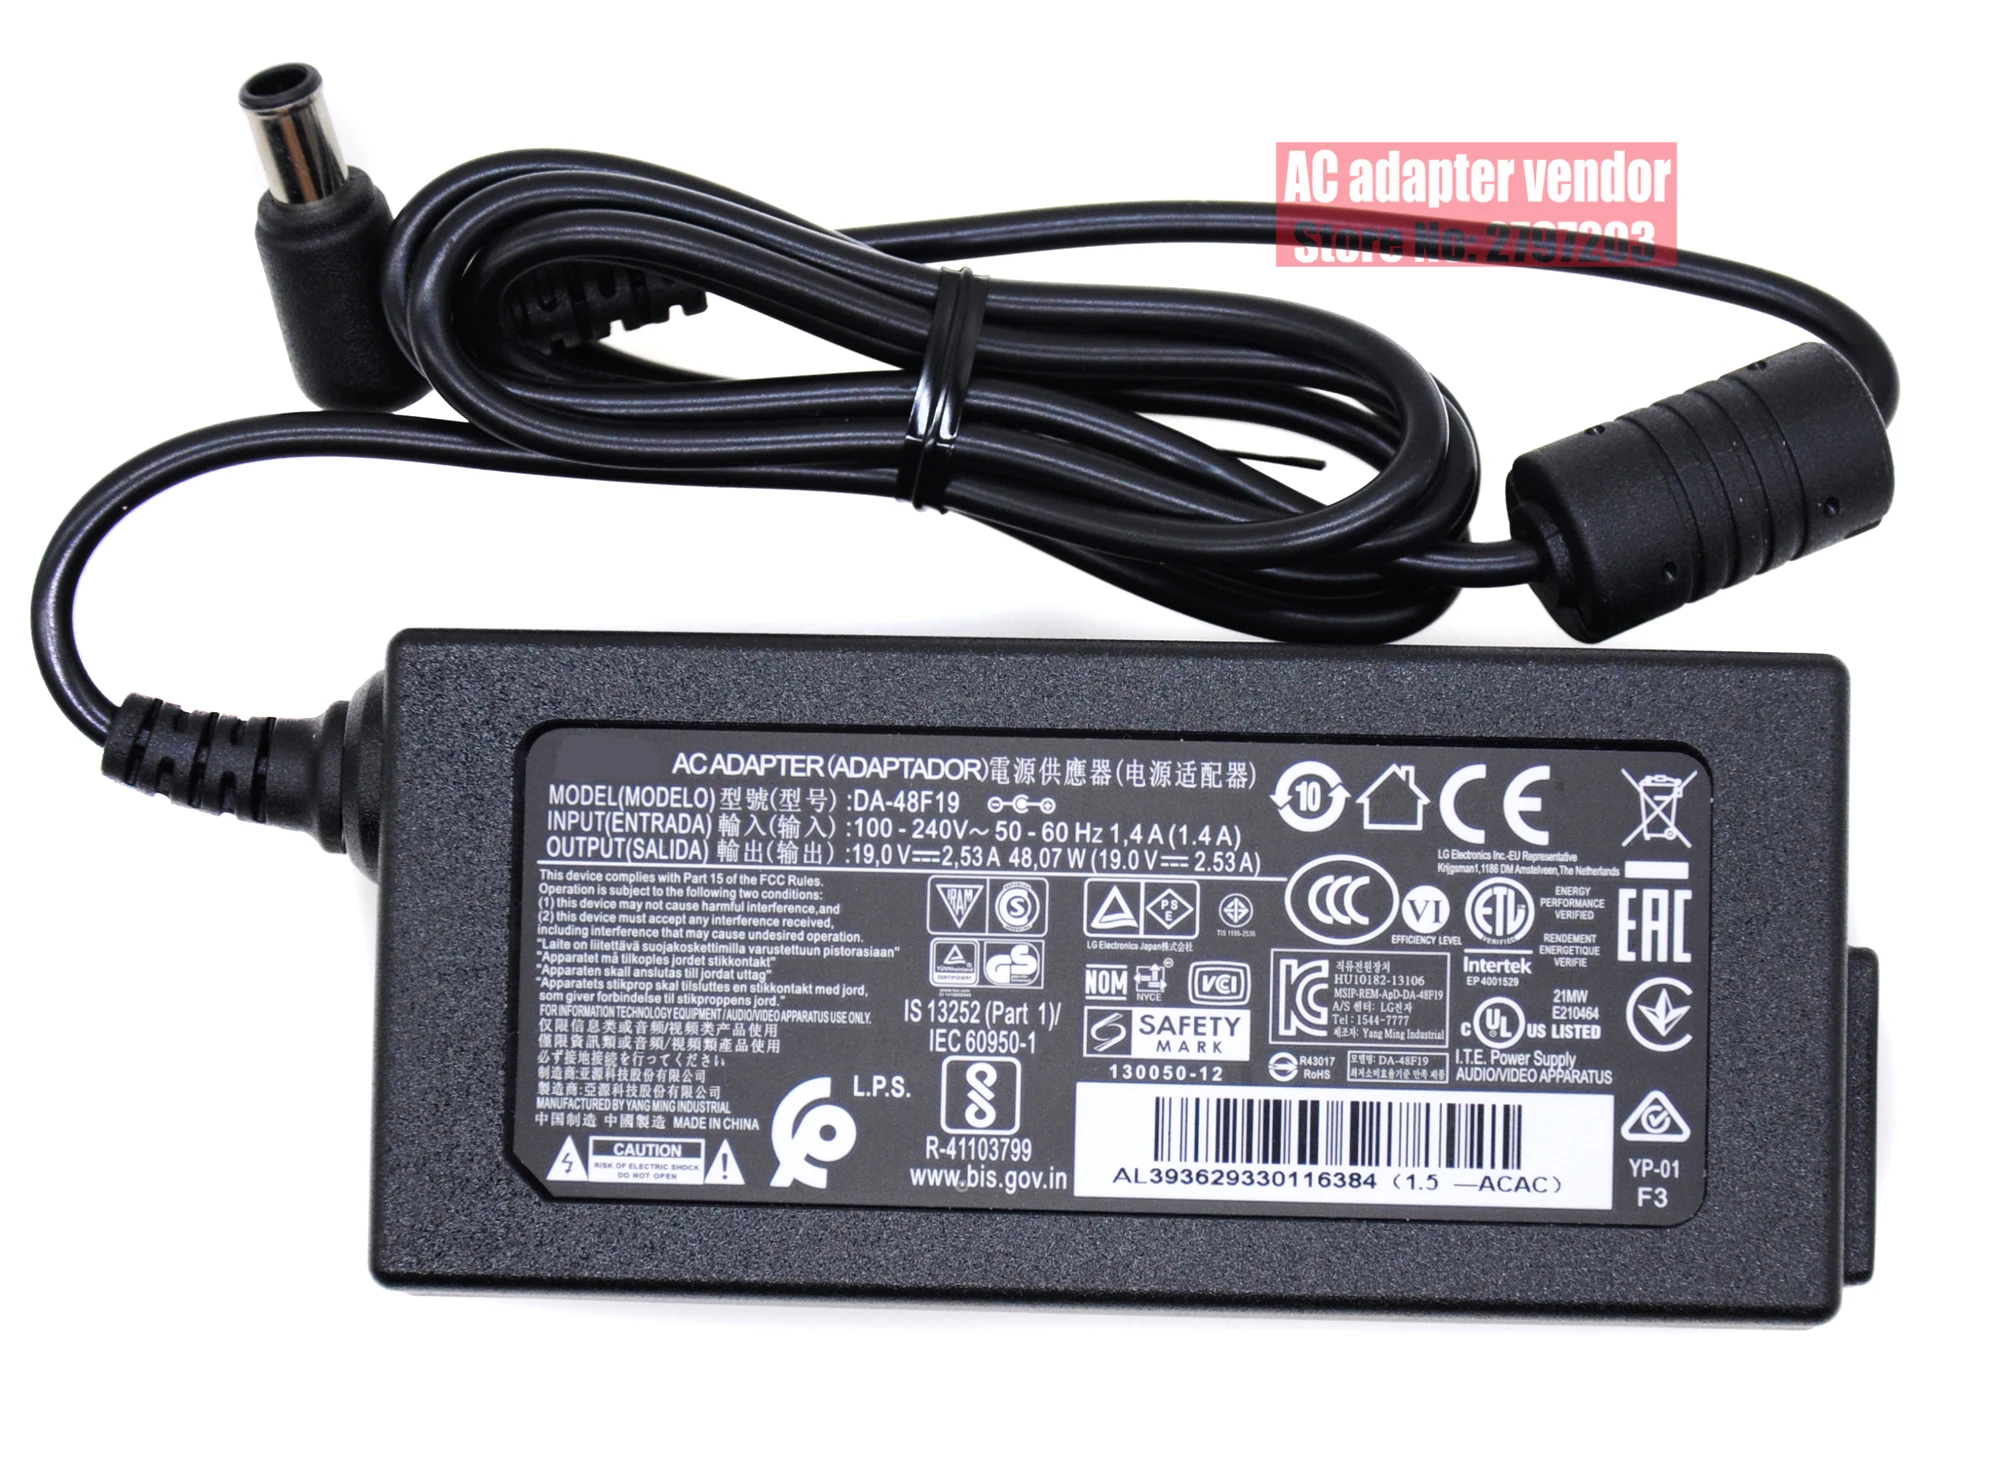 

brand new Original FOR LG 32mb25vq-B/C-L 19V 2.53A AC adapter Power supply Charger cord DA-48F19 LCAP35